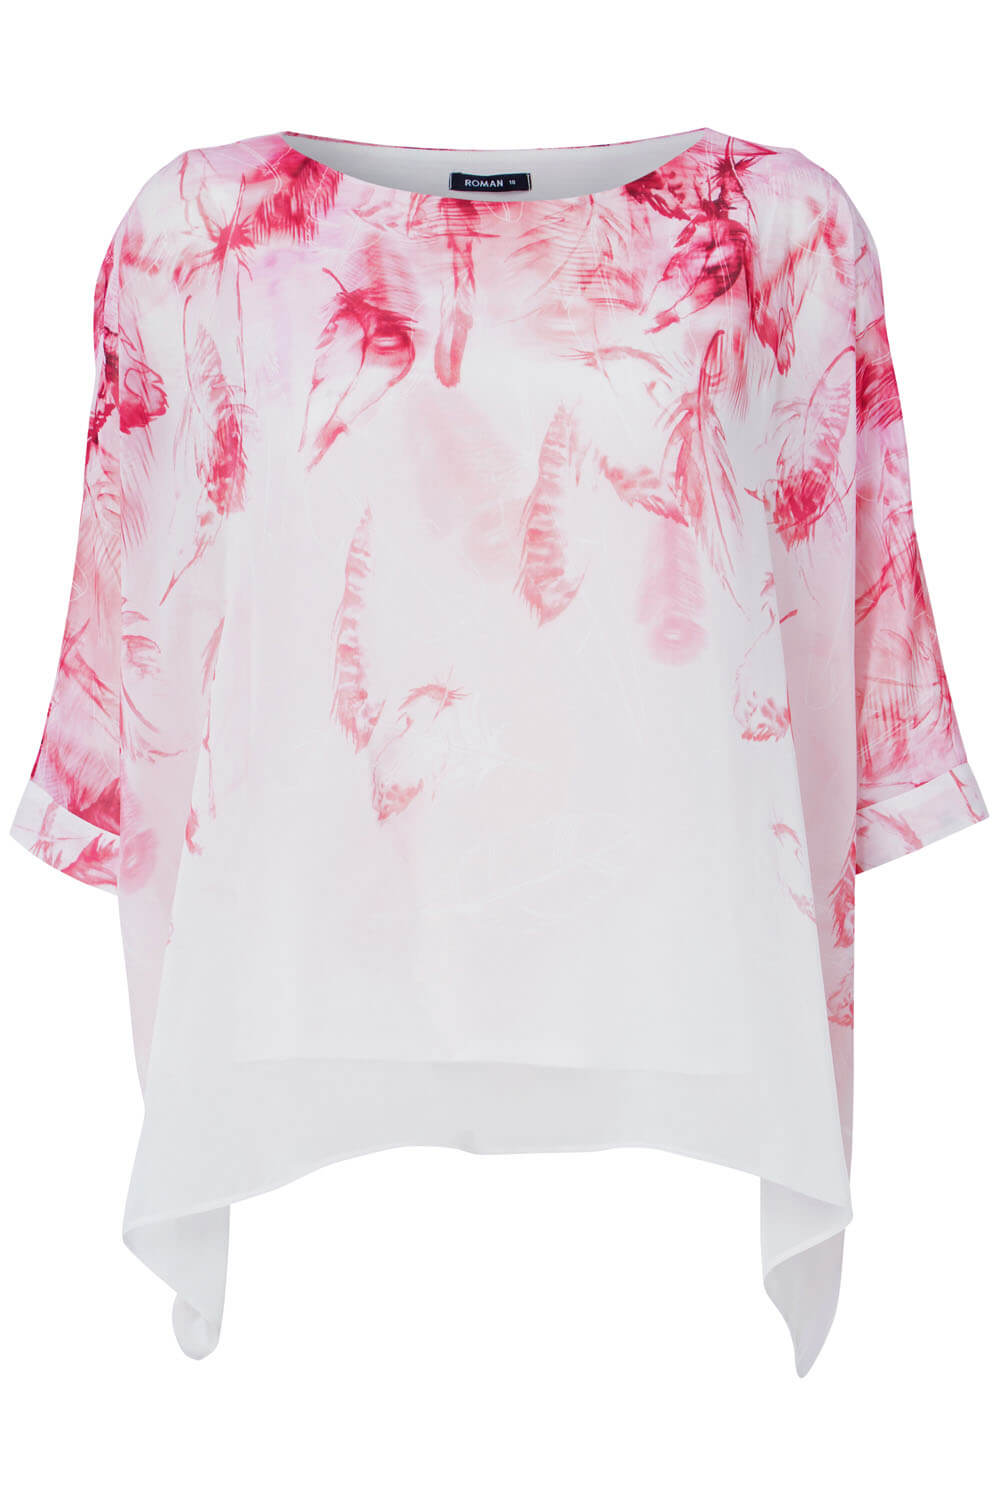 PINK Feather Border Print Overlay Top, Image 4 of 8